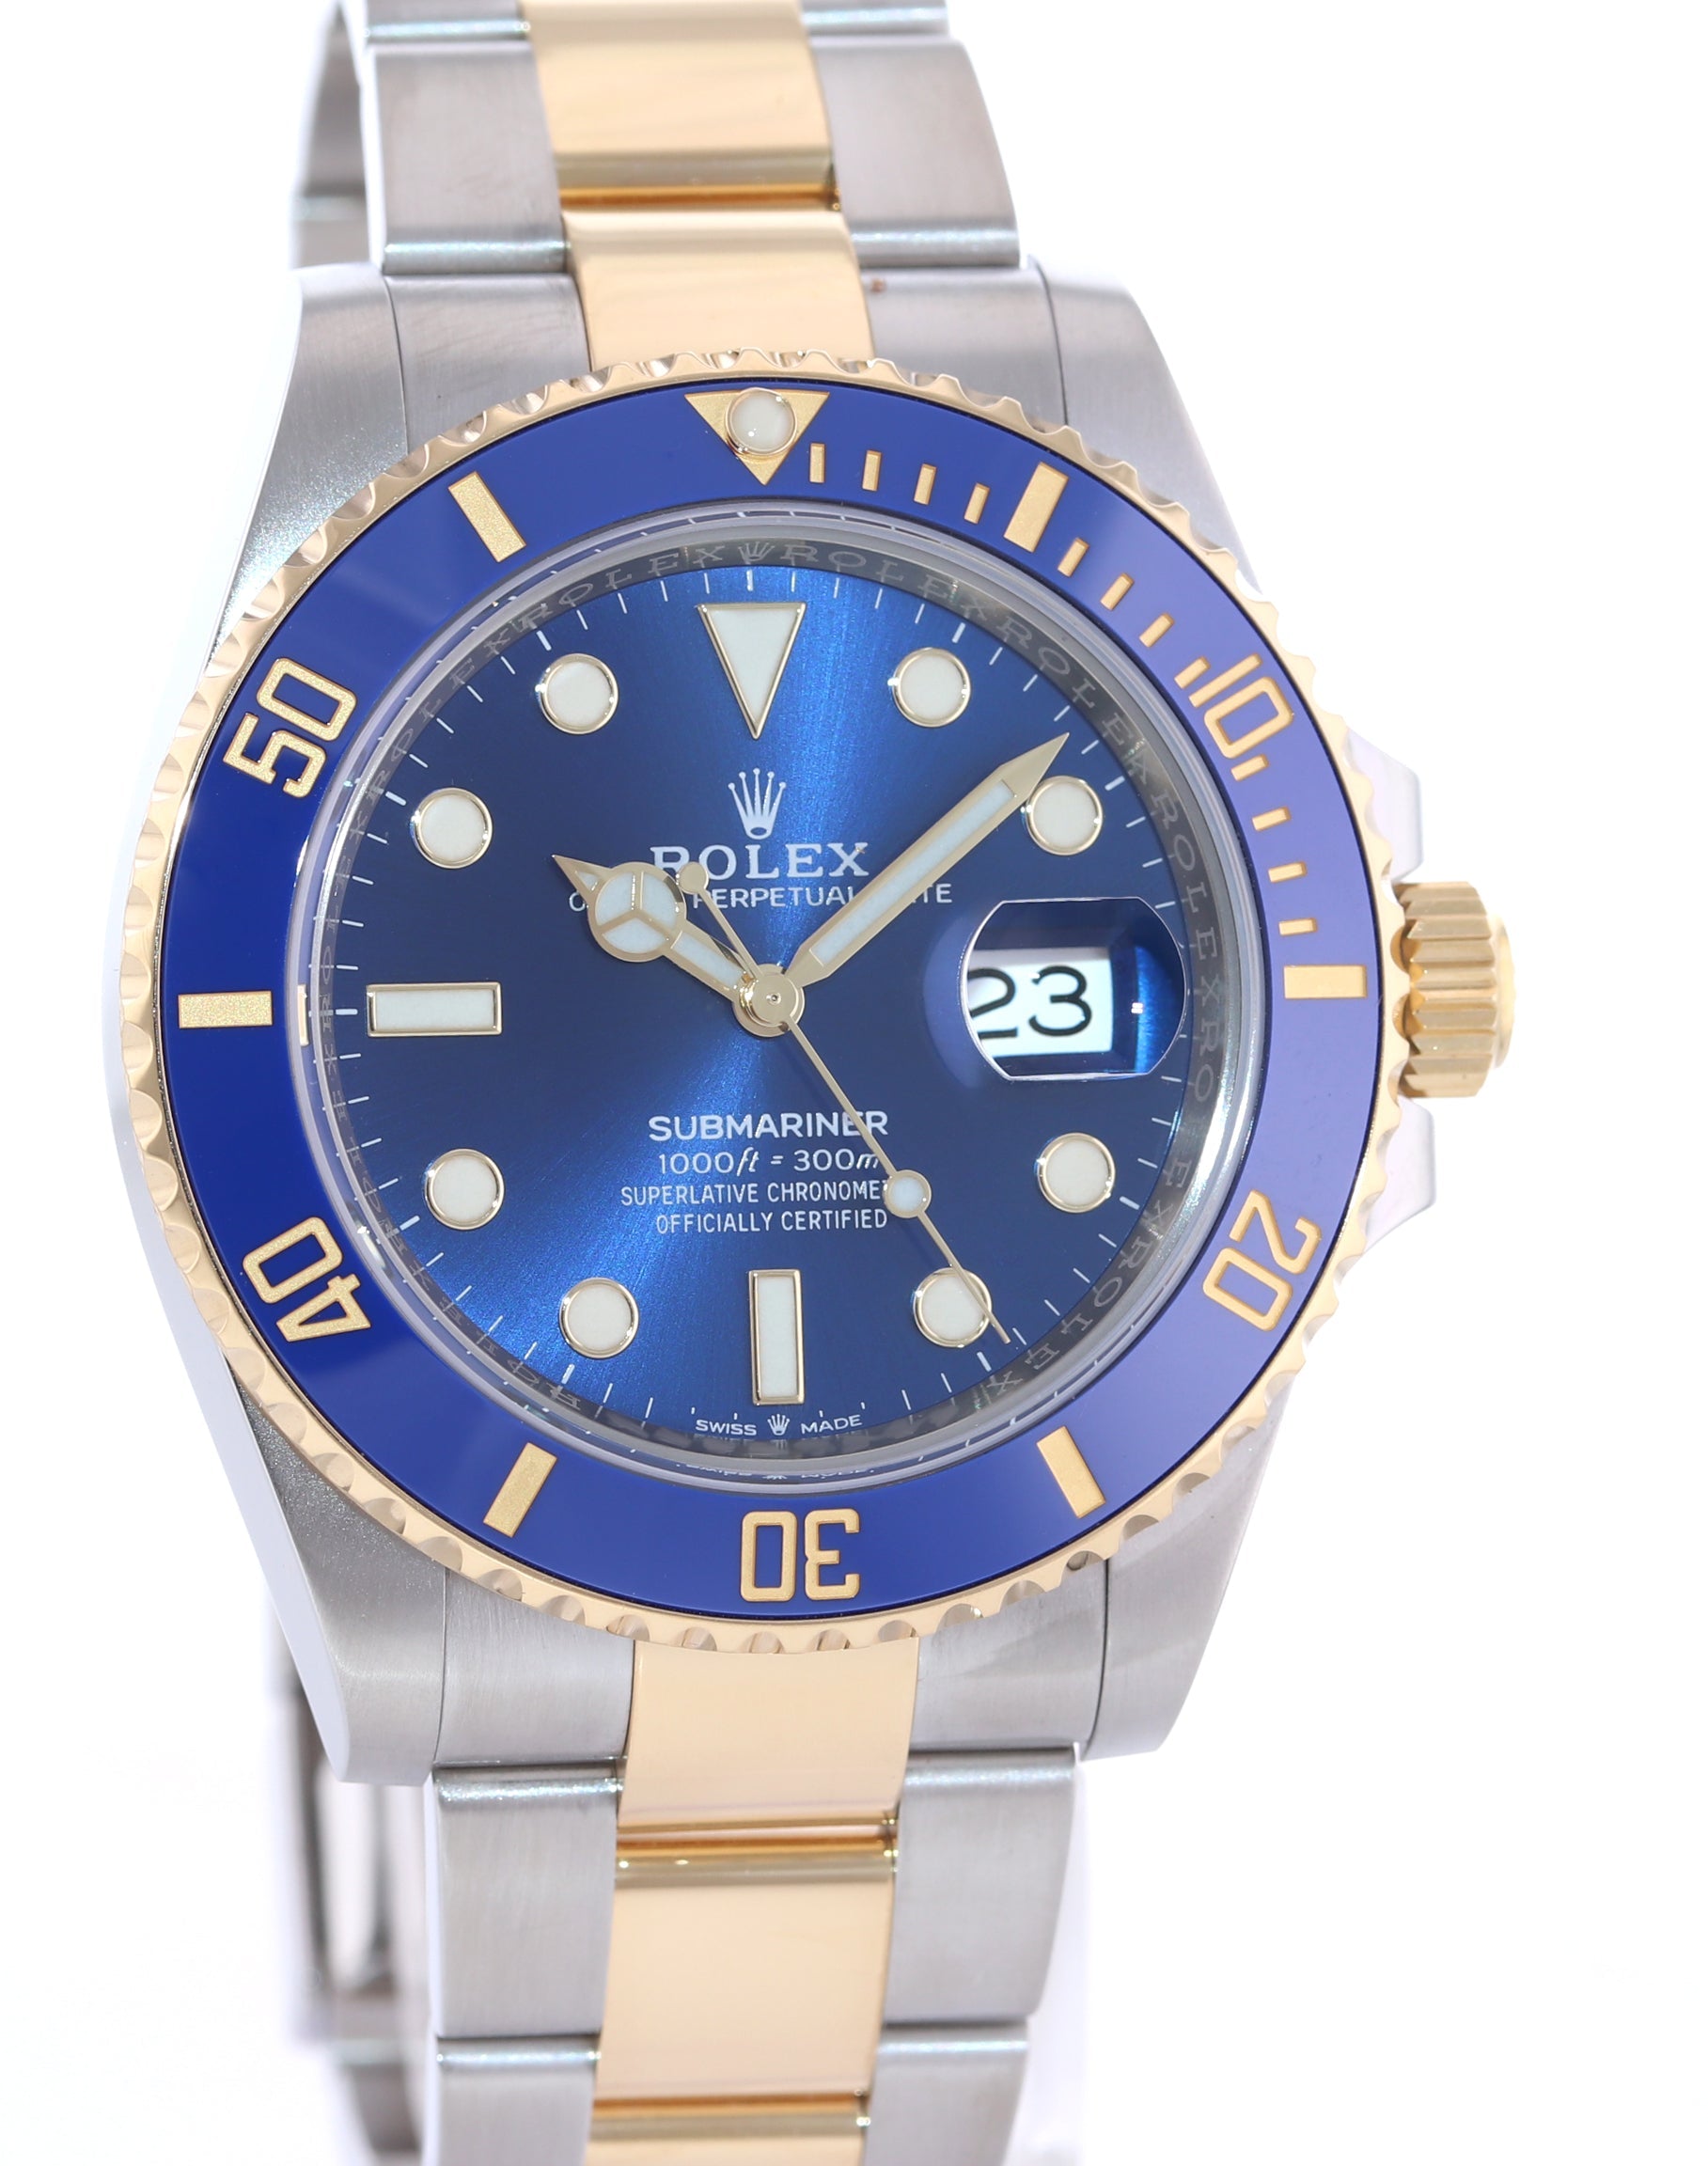 Rolex Submariner 41mm Blue 126613LB Two Tone Gold Watch Box